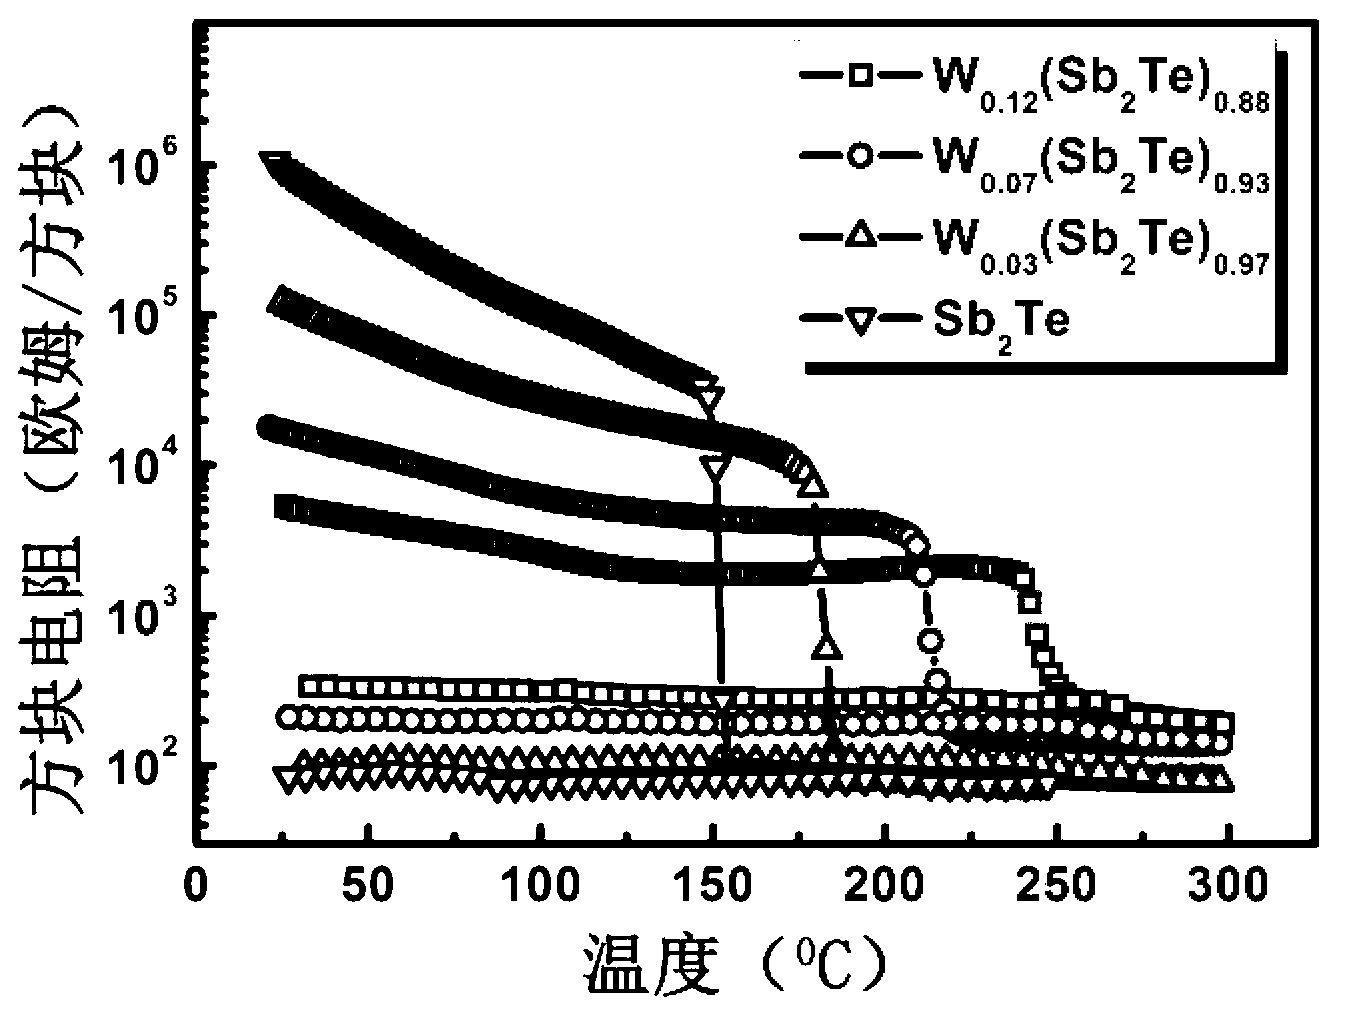 Antimony-rich high-speed phase change material for phase change memory, method for preparing antimony-rich high-speed phase change material and application of material